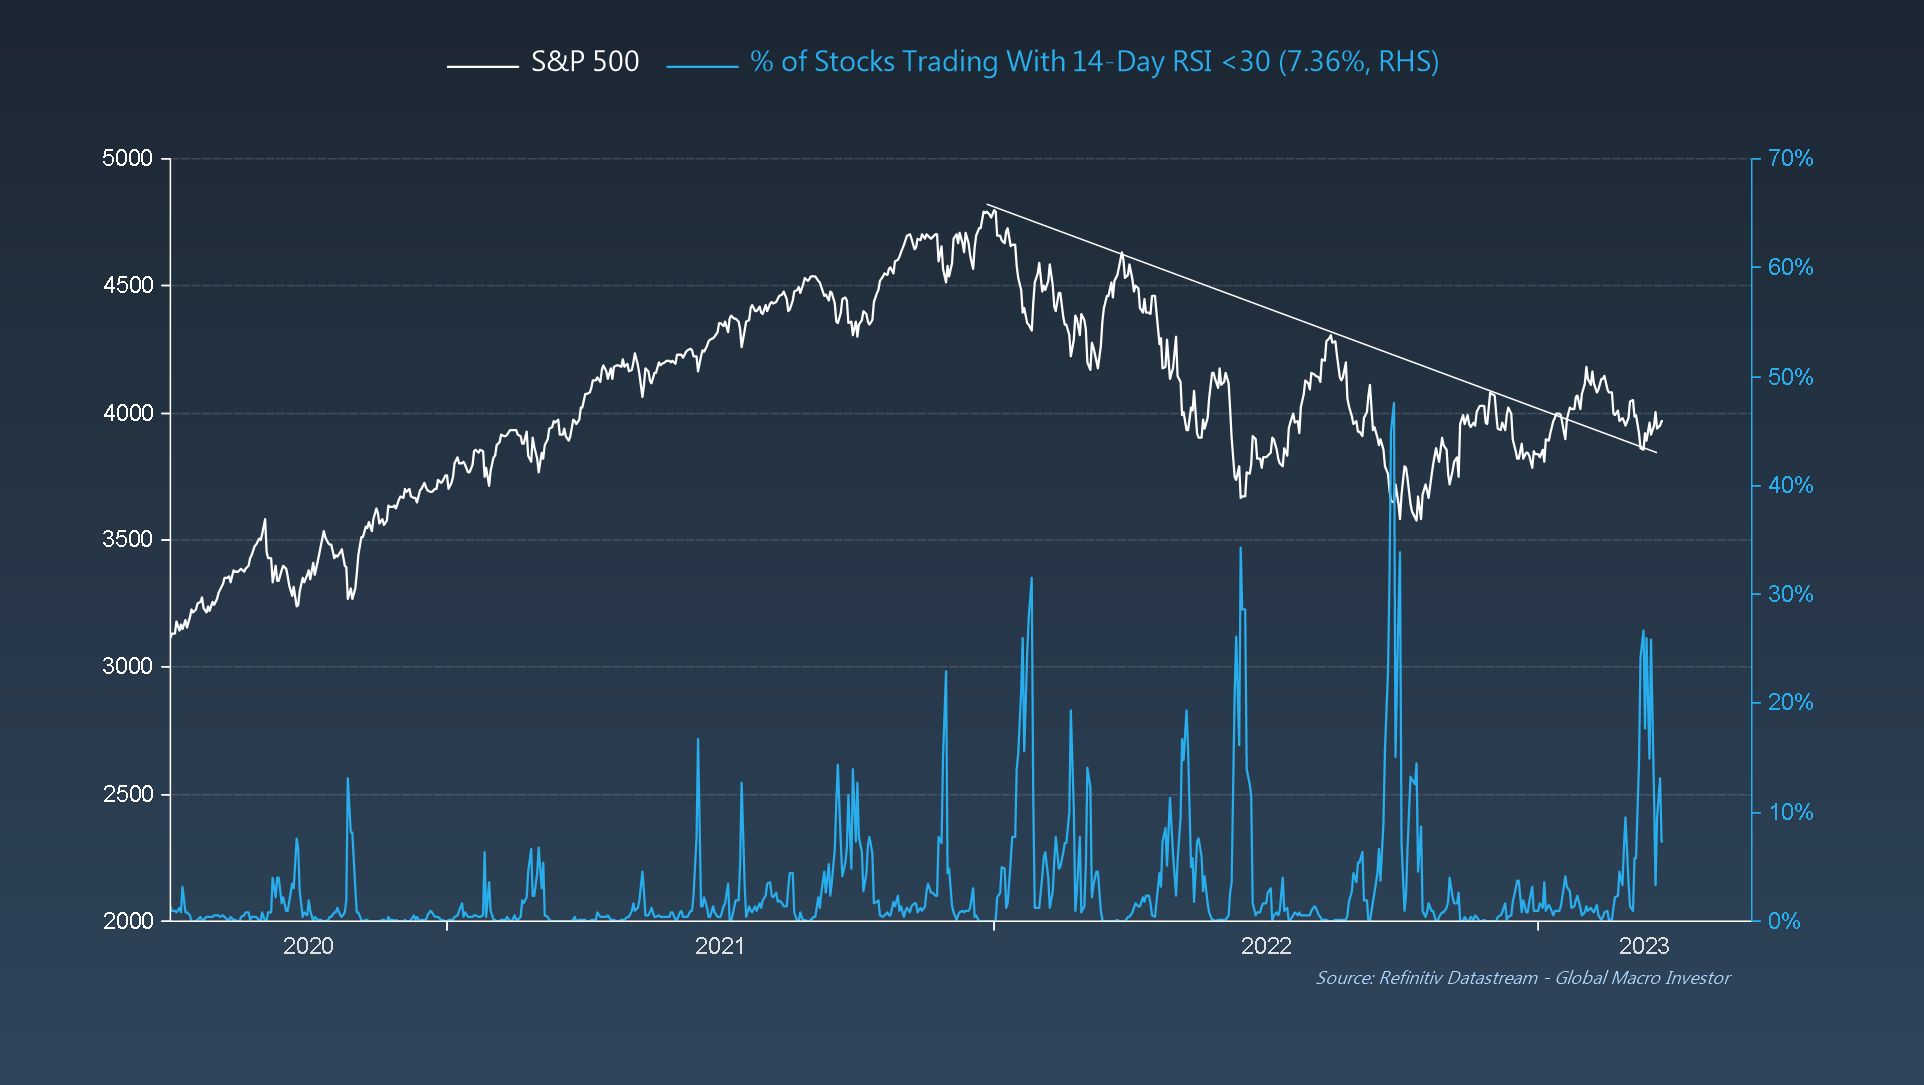 S&P 500 vs. % of Stocks With a 14-day RSI Below 30